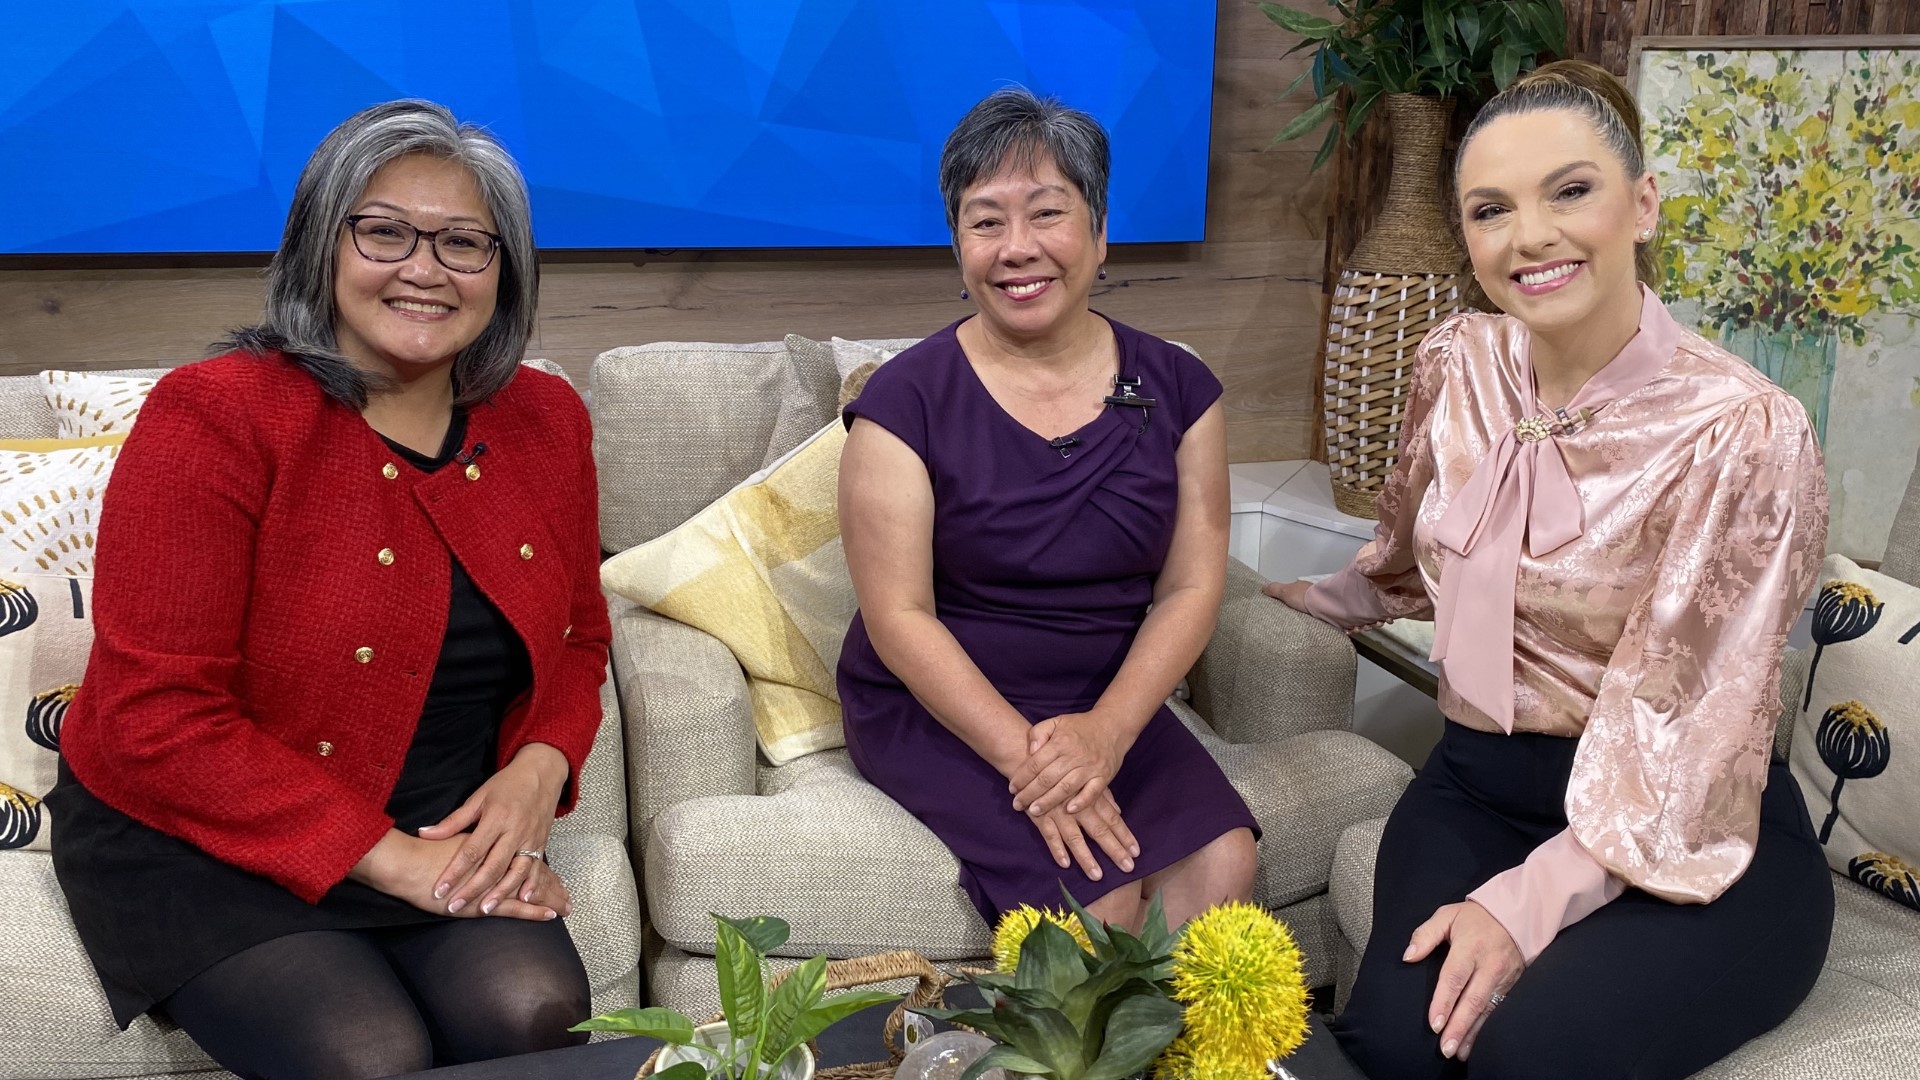 More than 800,000 Washingtonians care for older spouses, parents and loved ones. In the AAPI community the rate of caregiving is even higher. Sponsored by AARP.